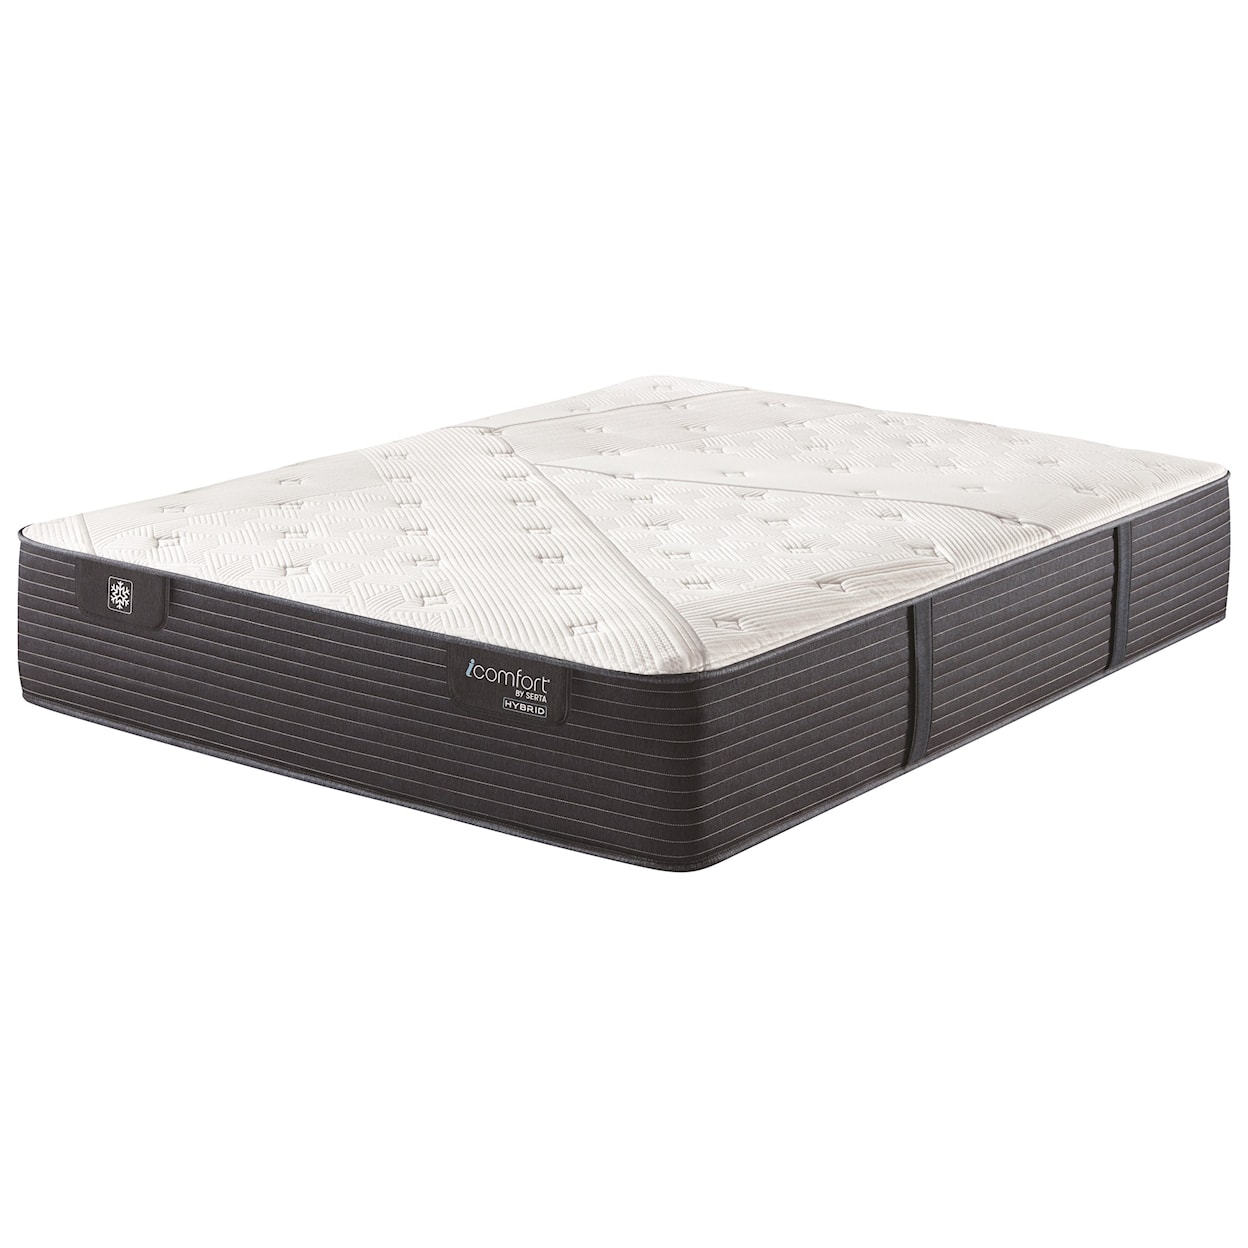 Serta CF1000 Quilted Hybrid II Firm Split King 13" Firm Quilted Hybrid Mattress